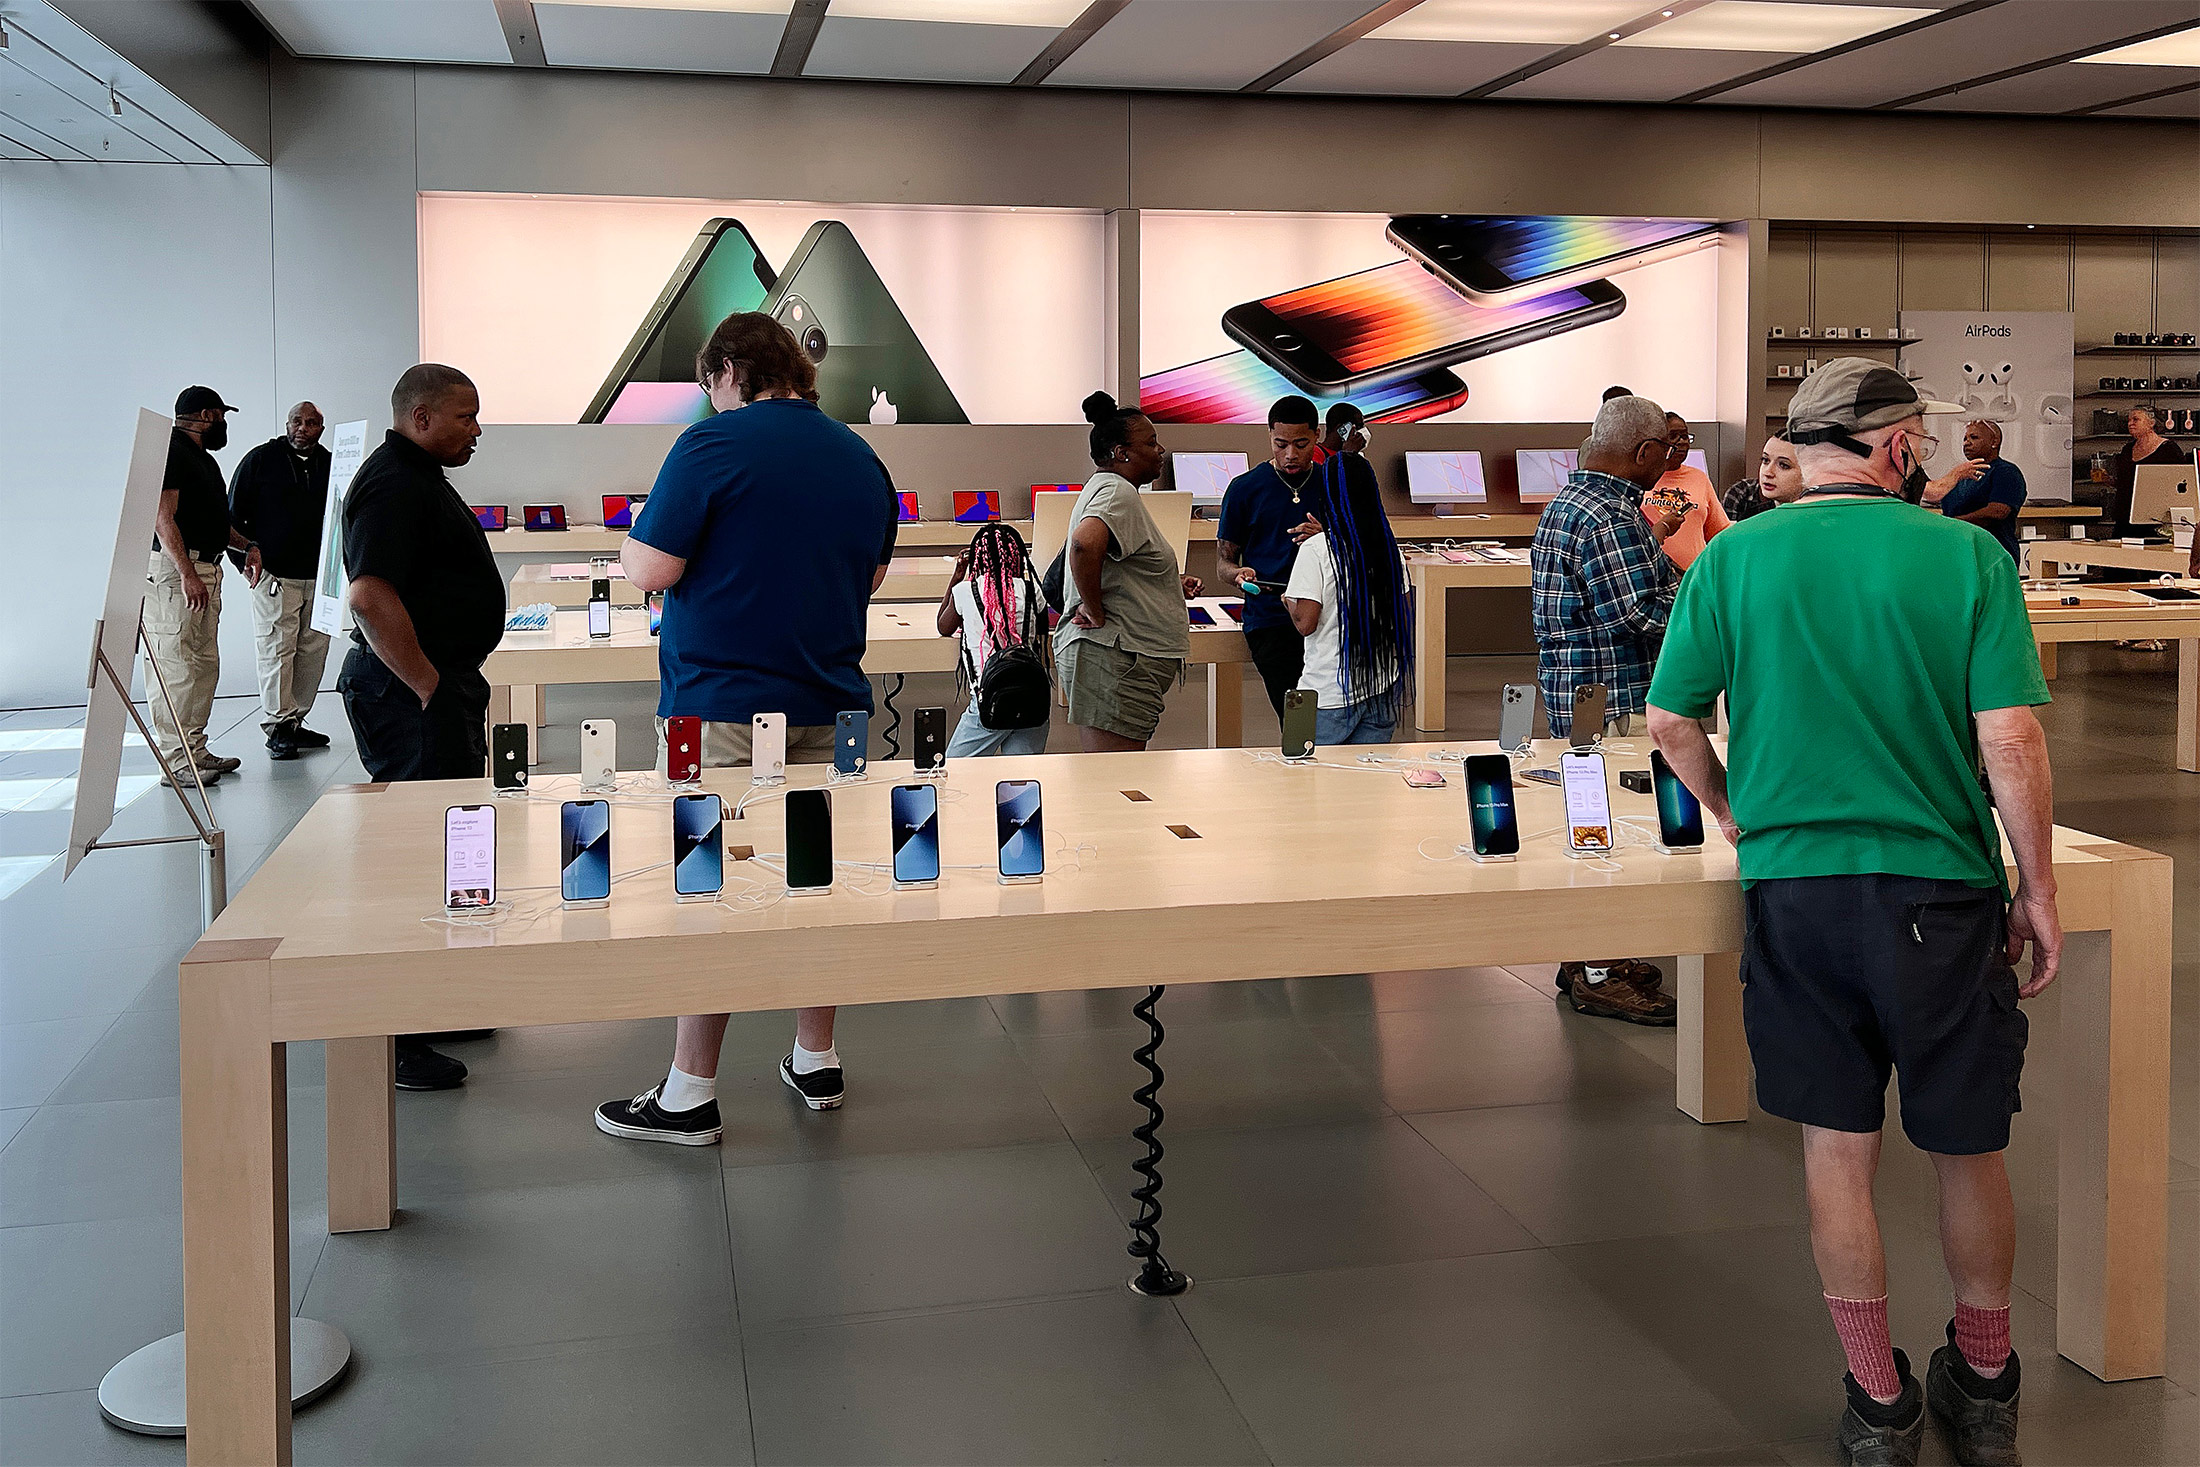 Apple (AAPL) Ups Benefits for Retail Workers in Tightening Labor Market -  Bloomberg